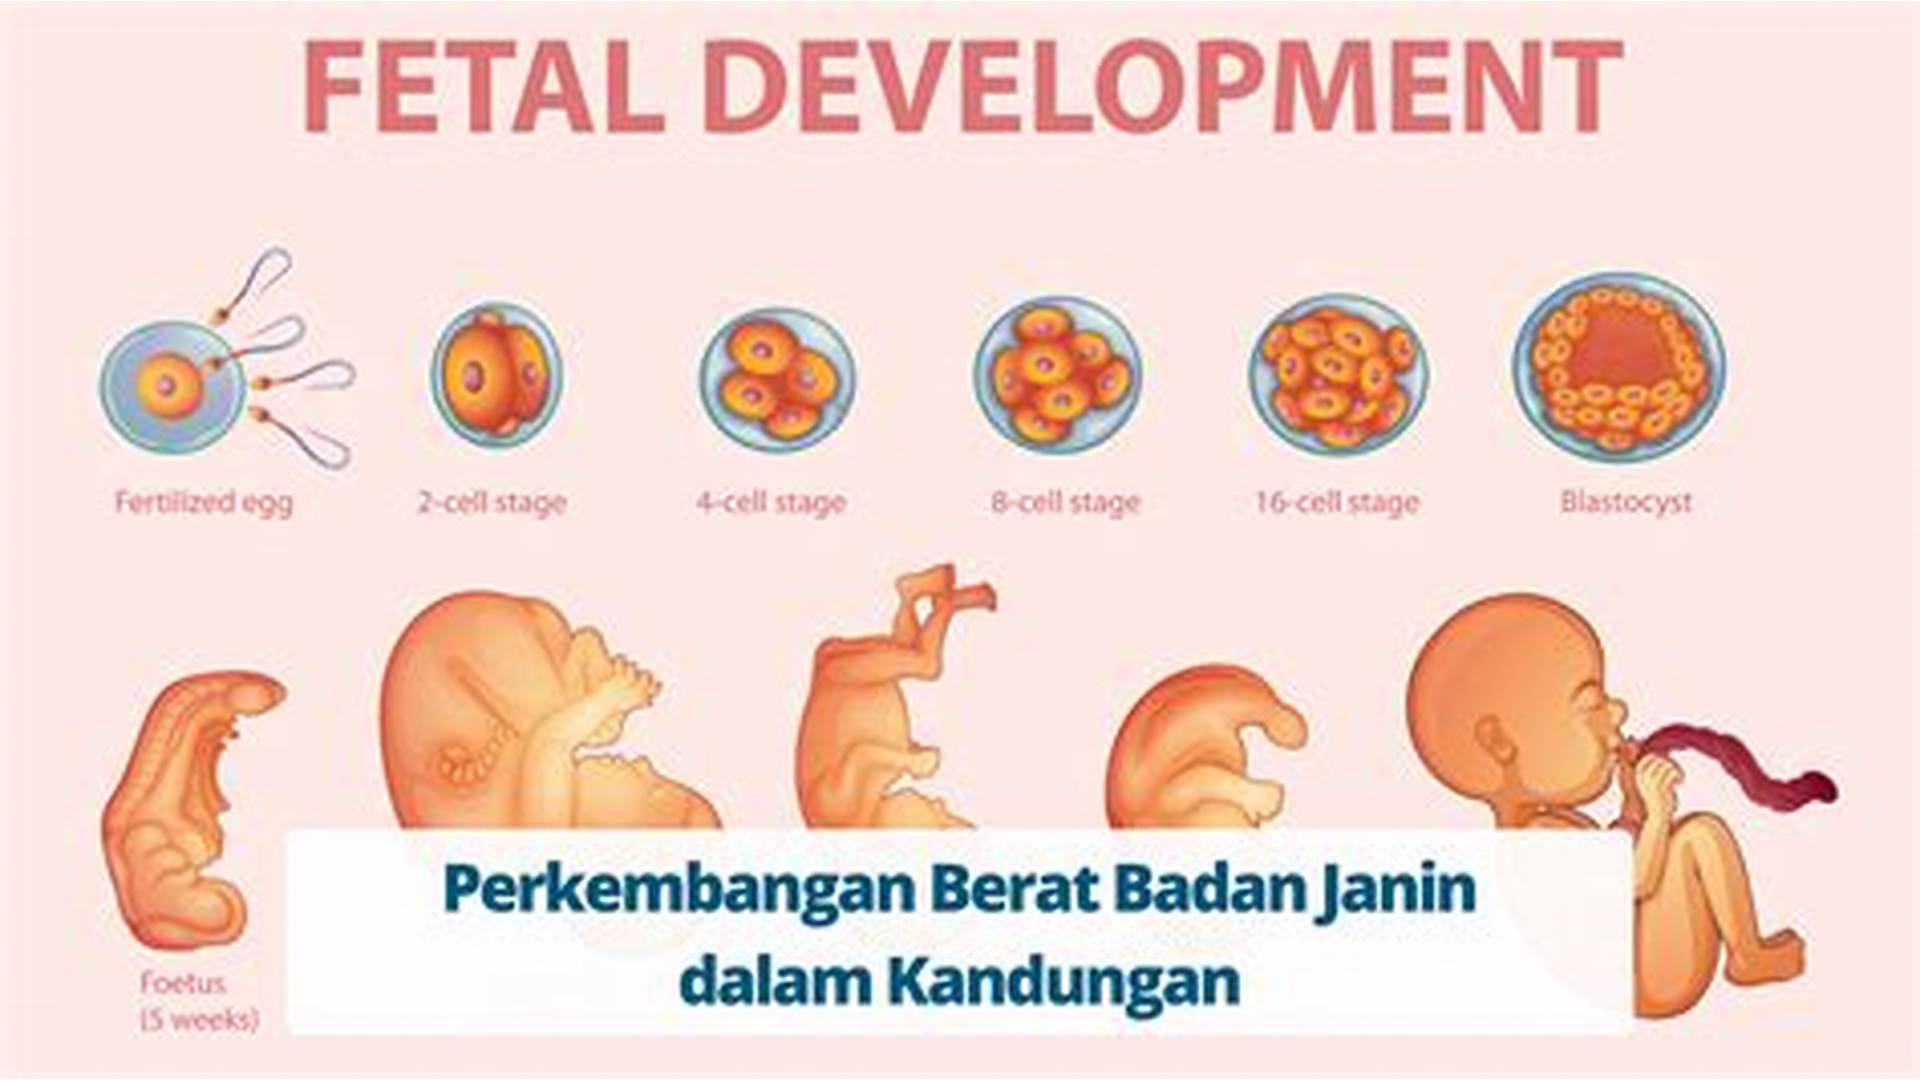 Understanding Fetomaternal Health Care in Indonesia